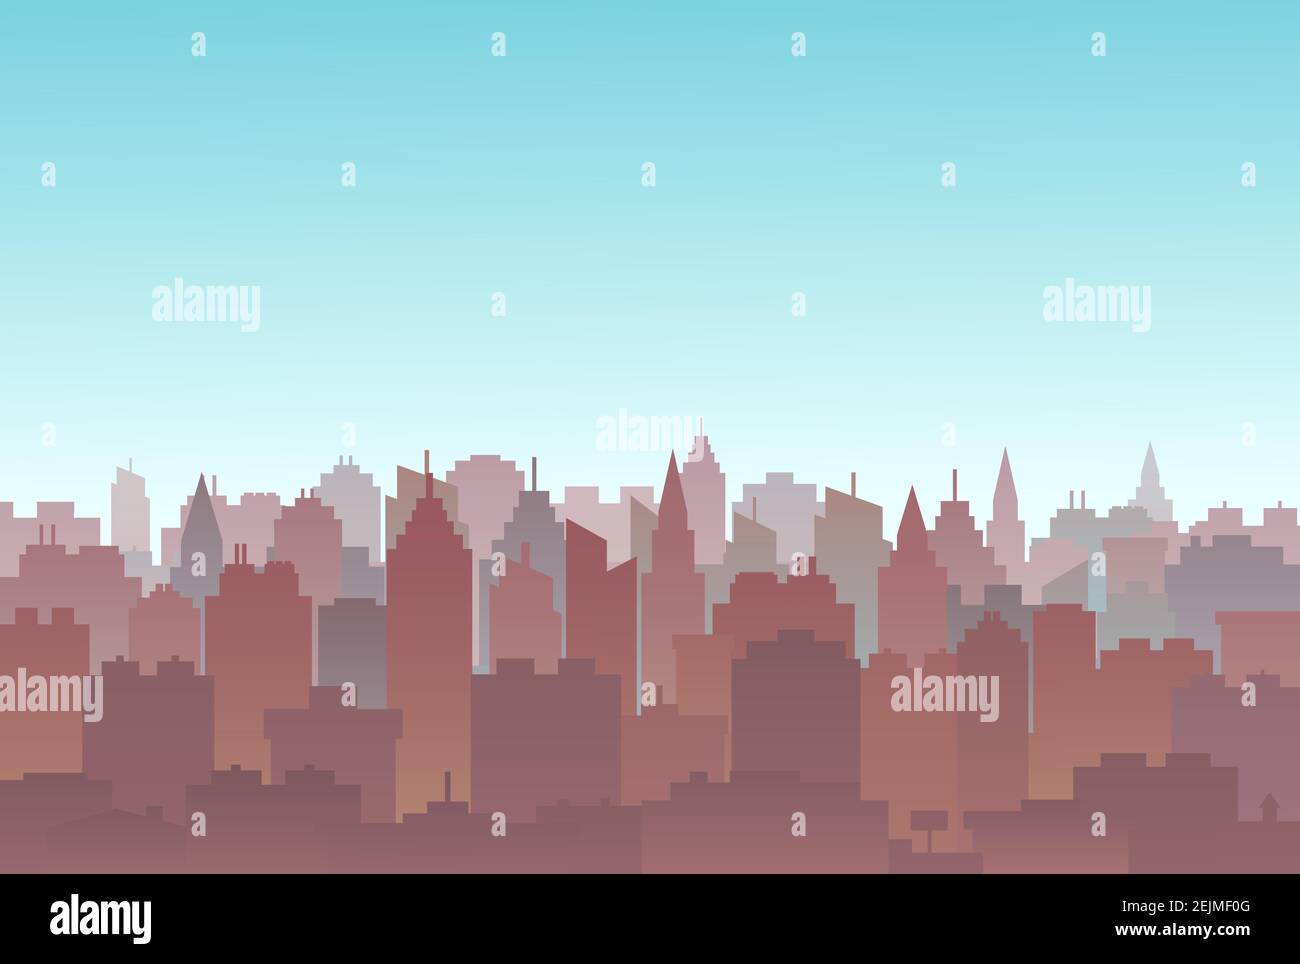 Sunset City silhouette landscape. Horizontal City landscape. Downtown skyline with high skyscrapers. Panorama architecture Goverment buildings illustr Stock Vector